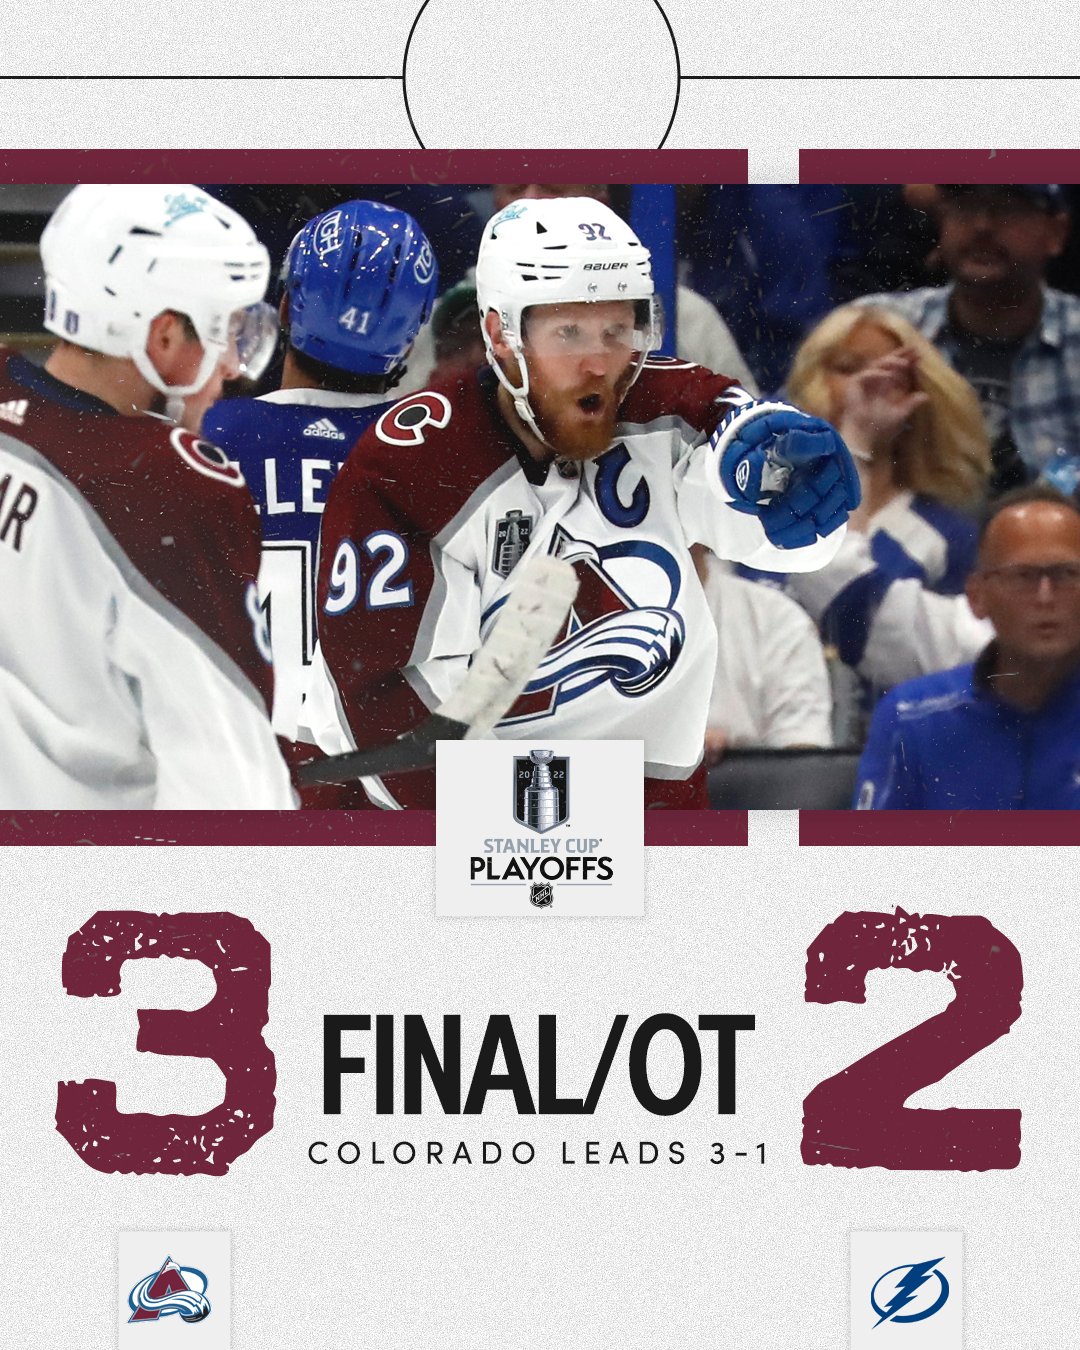 Colorado Avalanche close on Stanley Cup glory after controversial OT win, NHL